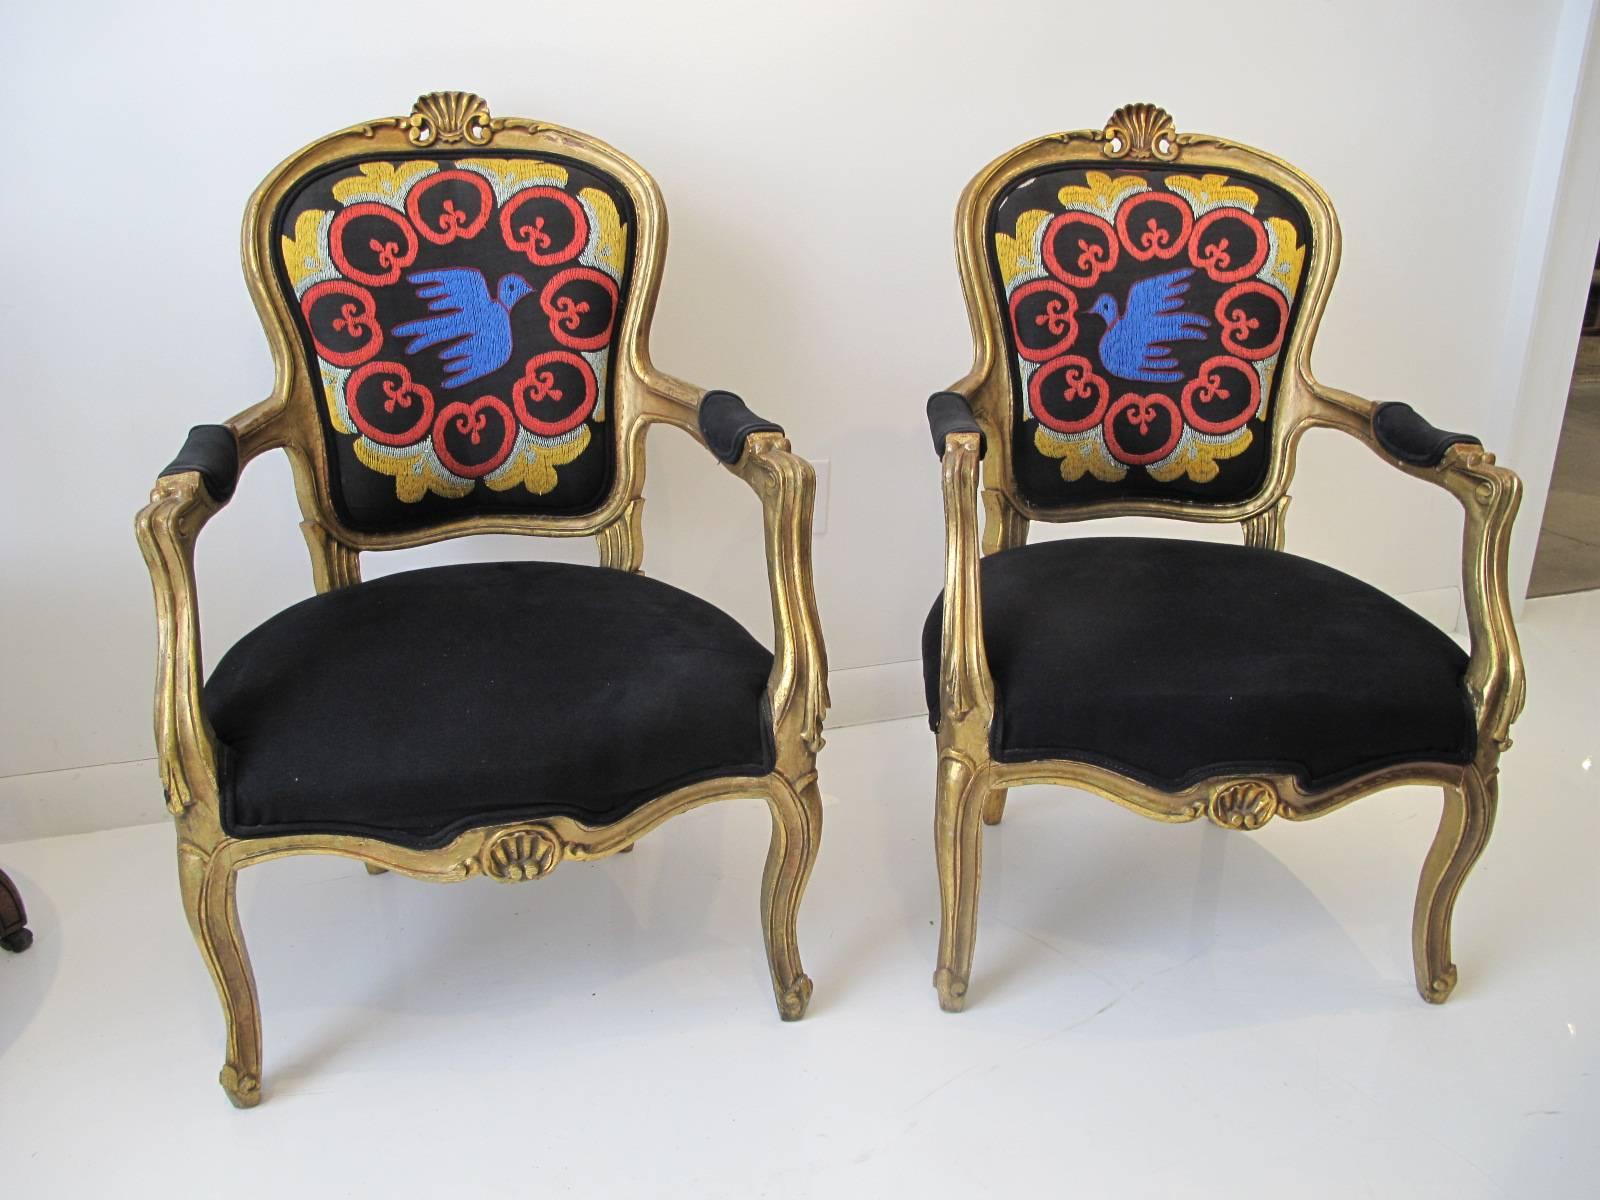 Pair of whimsical giltwood Louis XV style armchairs with stitched upholstery in the style of the Picasso dove.